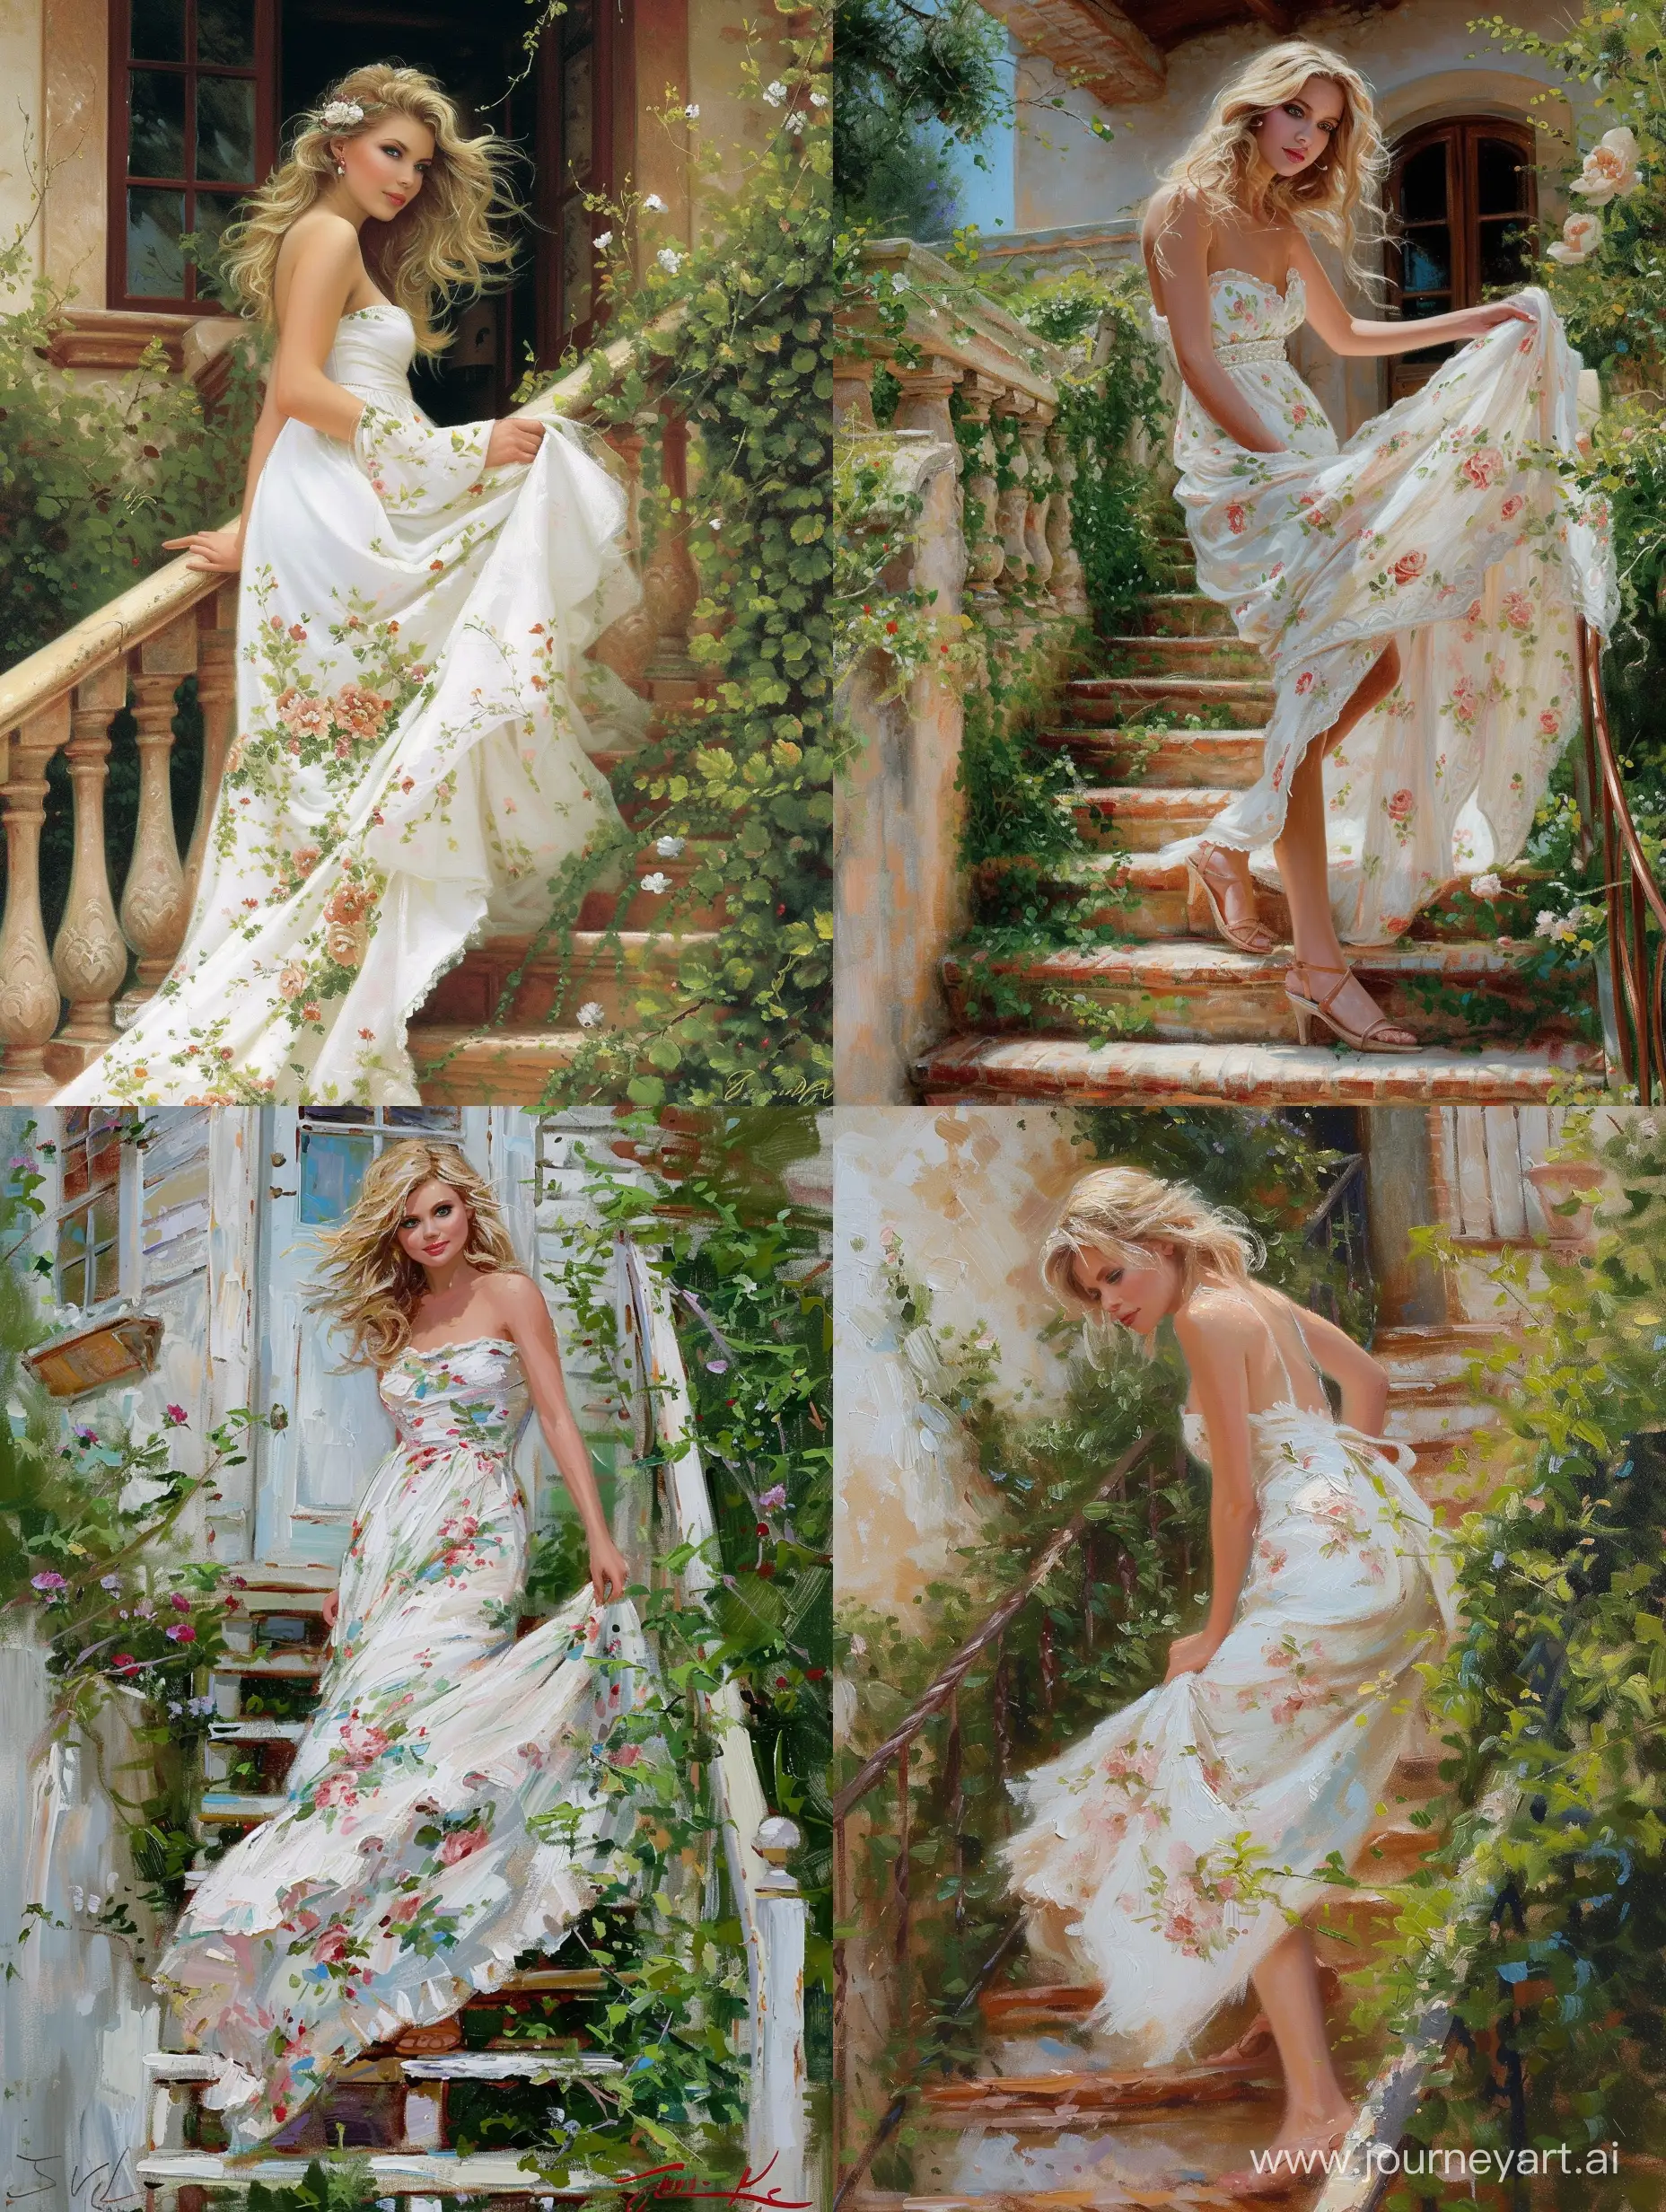 Impressionist-Painting-of-Woman-Ascending-Stairs-Amidst-Lush-Greenery